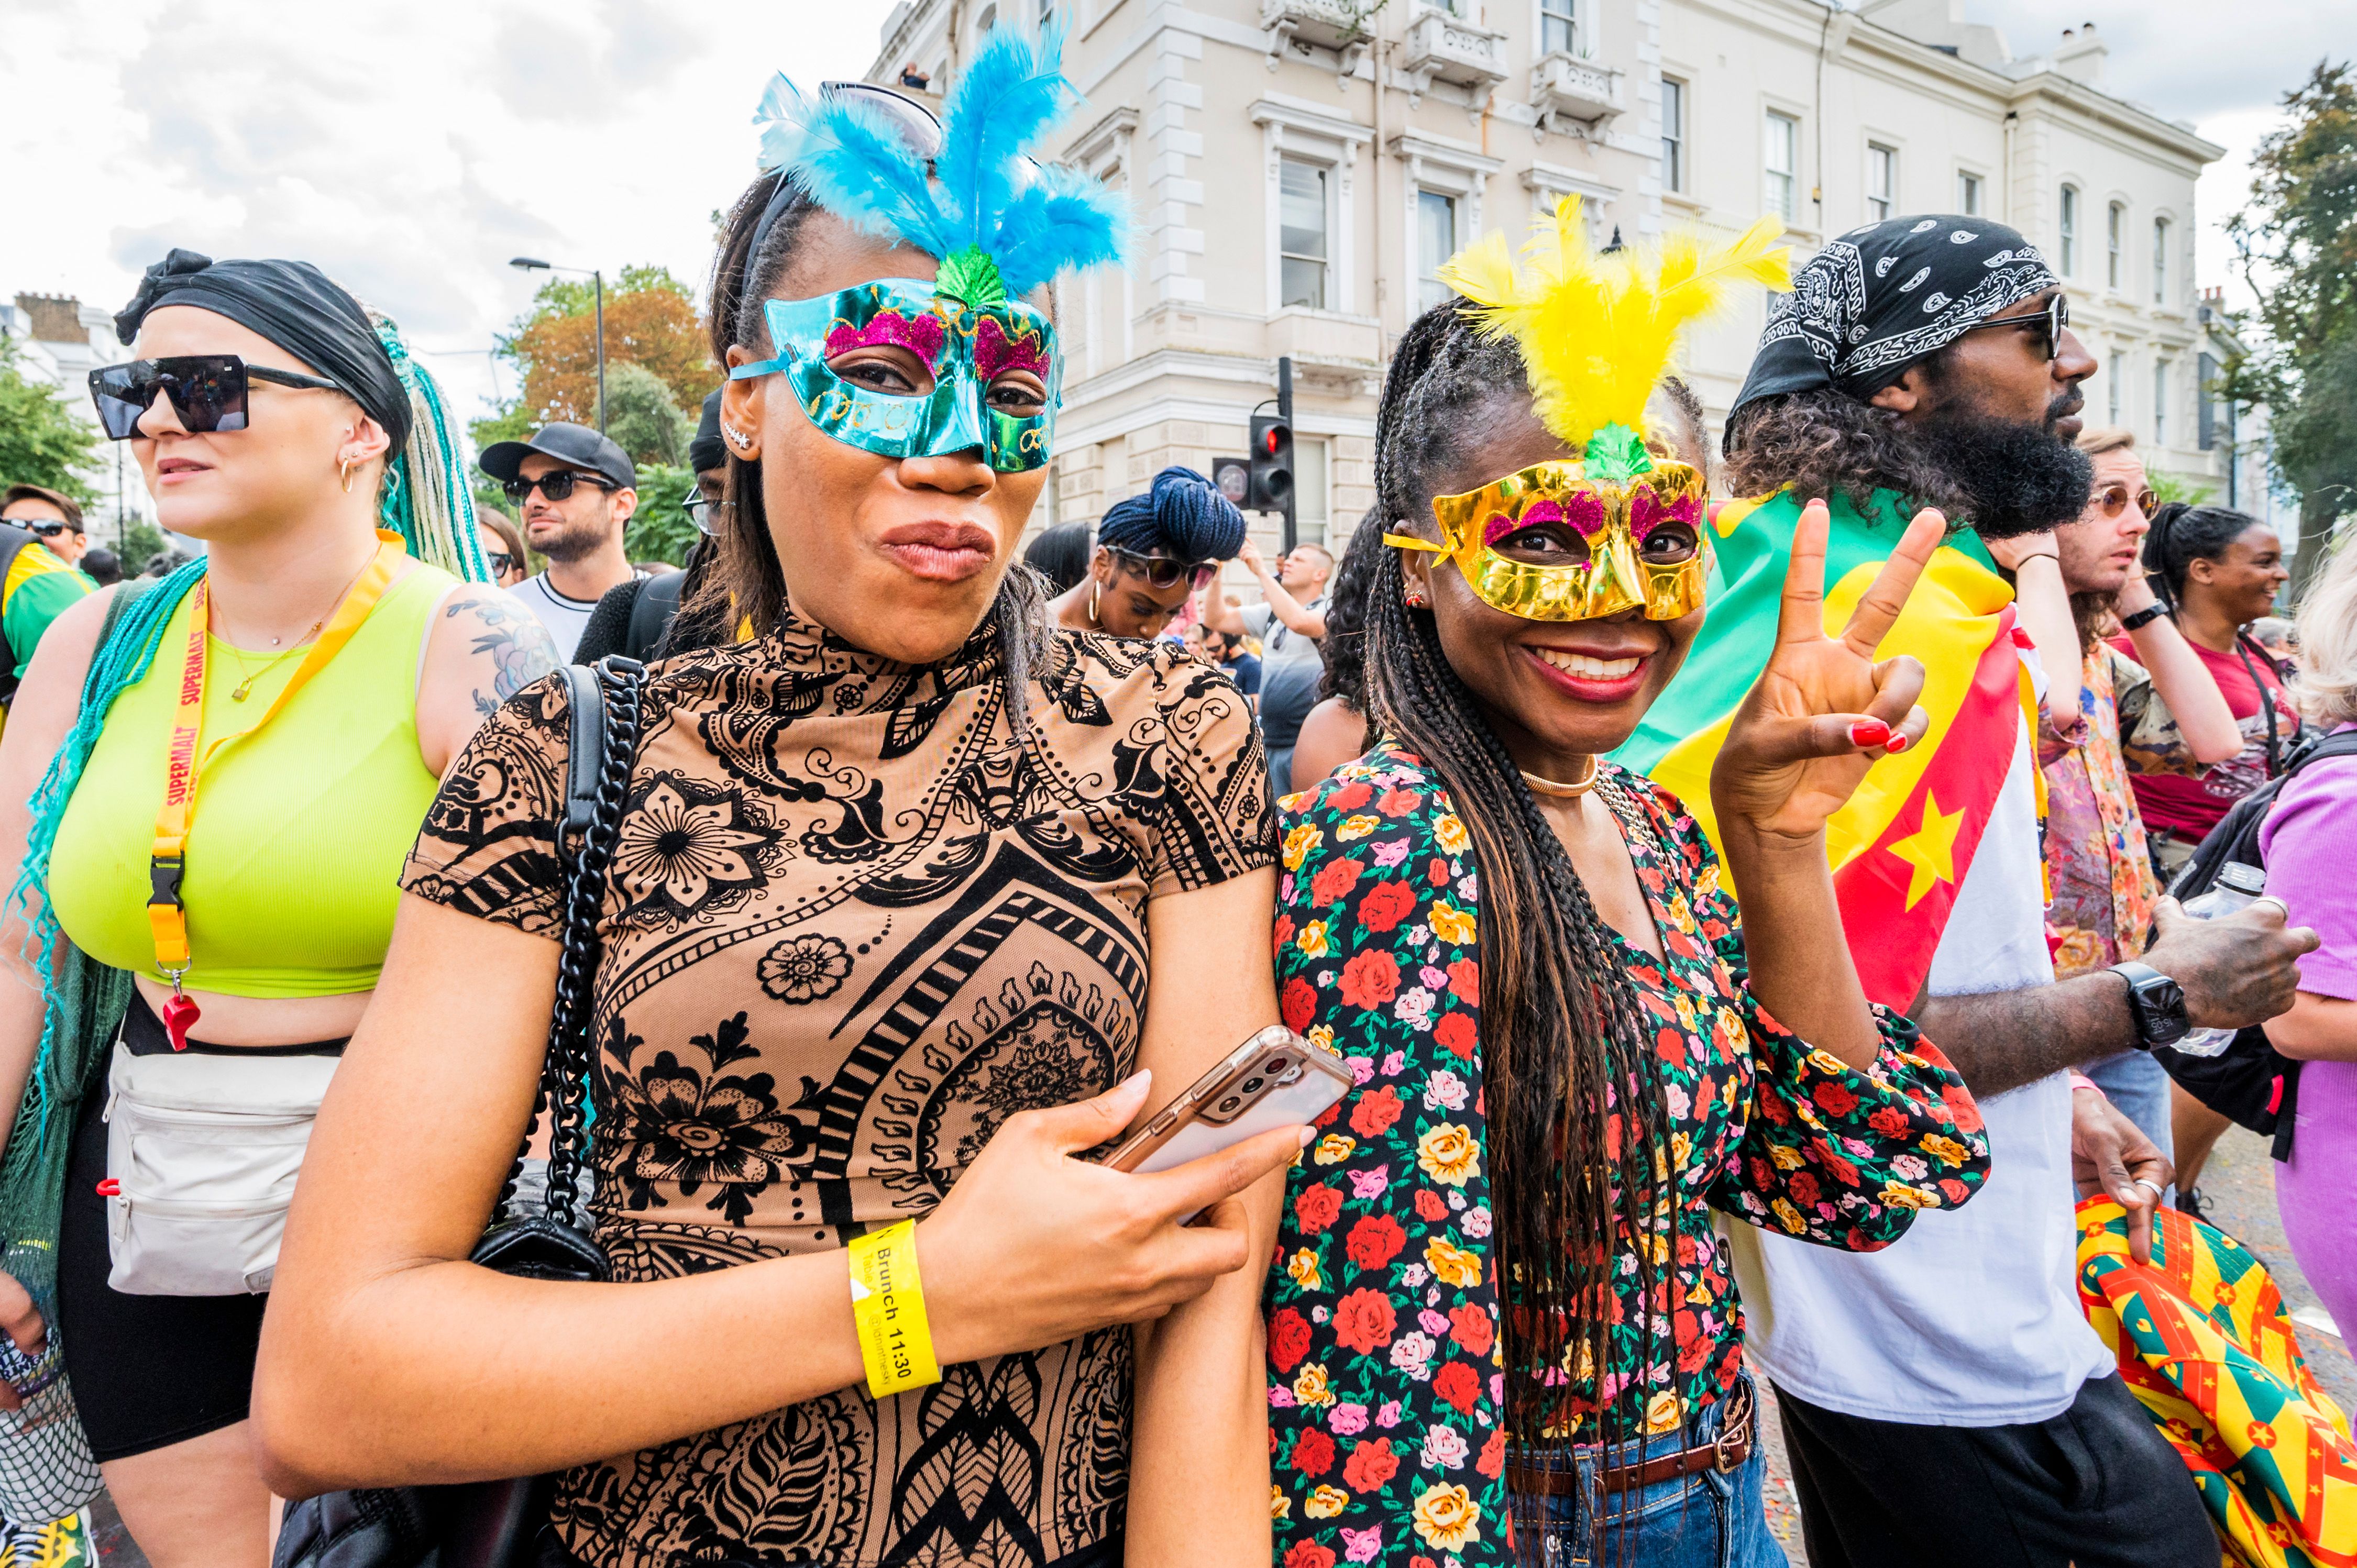 The carnival is an annual event on the streets of the Royal Borough of Kensington and Chelsea held over the August bank holiday weekend